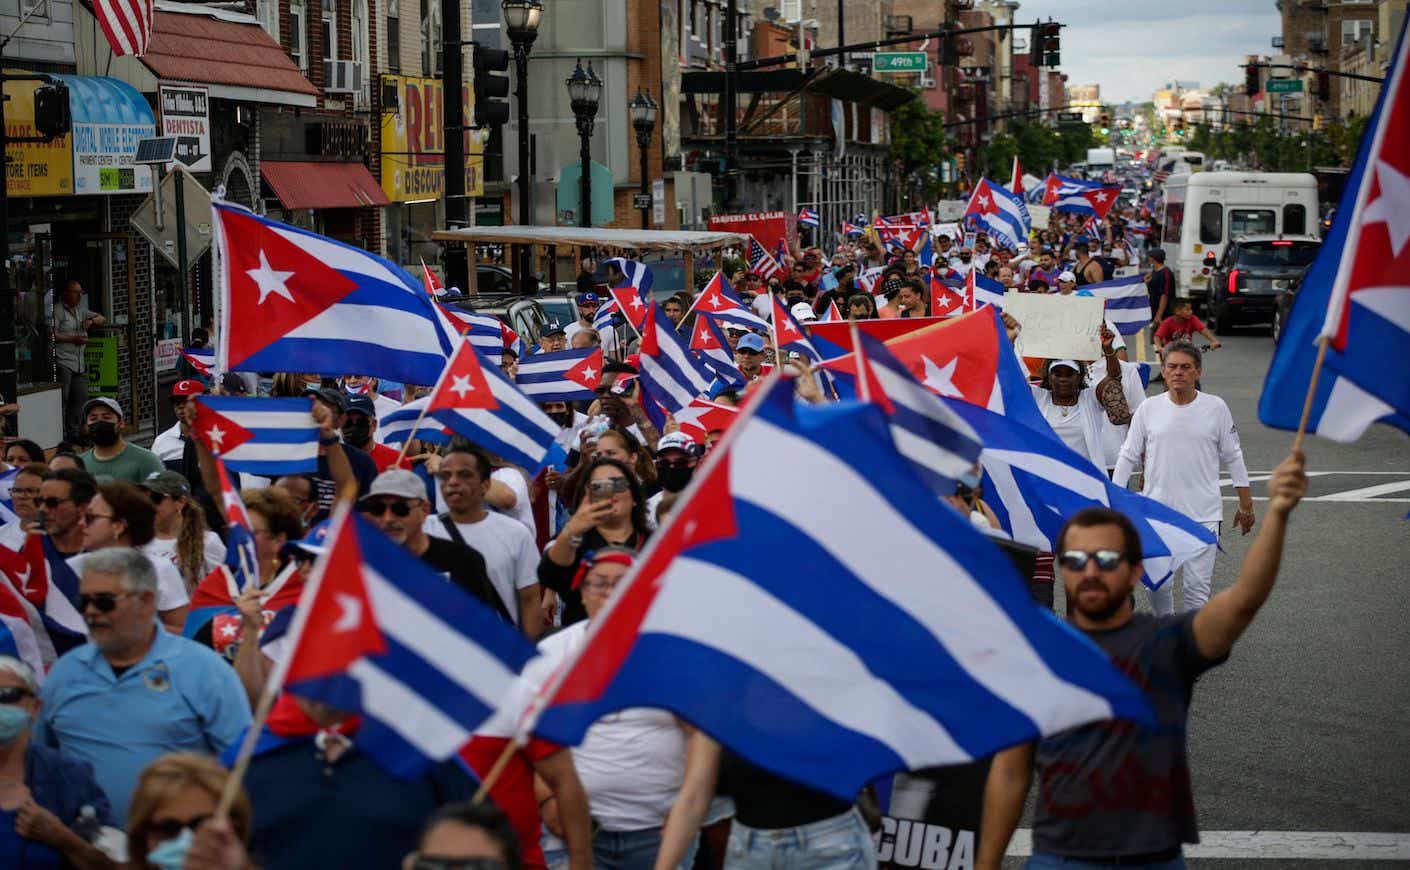 What's Happening in Cuba With the Protests KCM